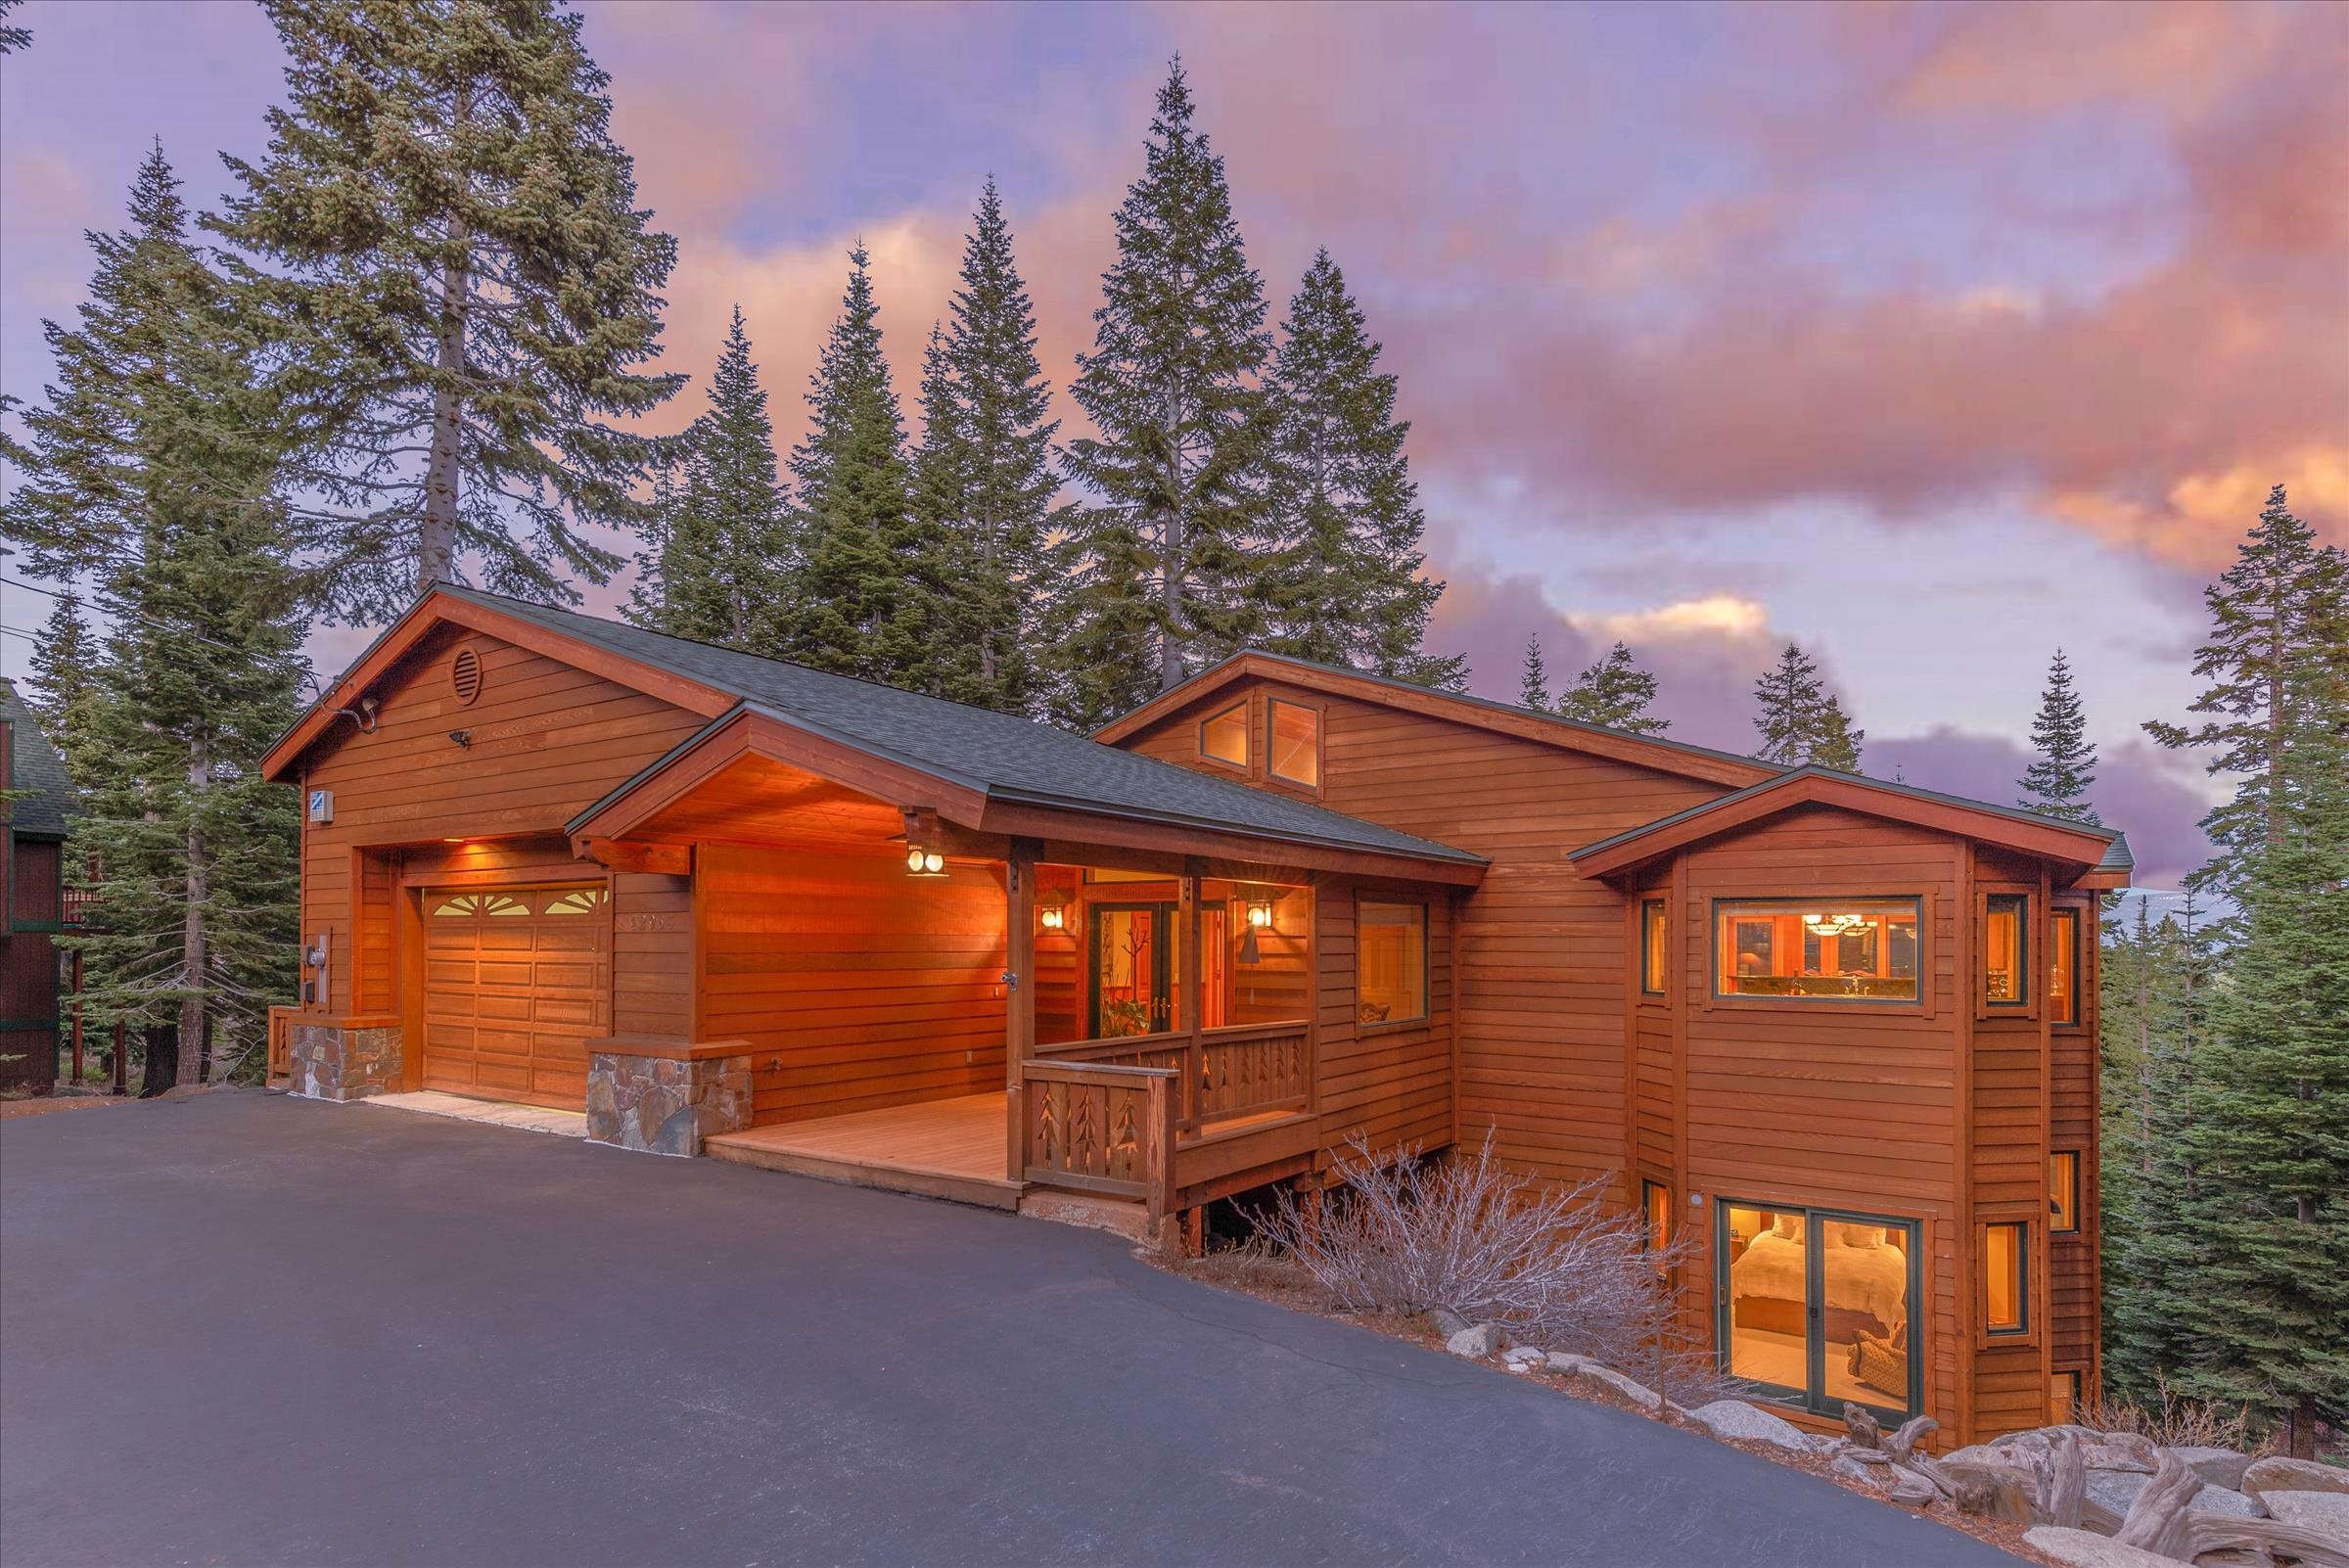 Image for 12963 Skislope Way, Truckee, CA 96161